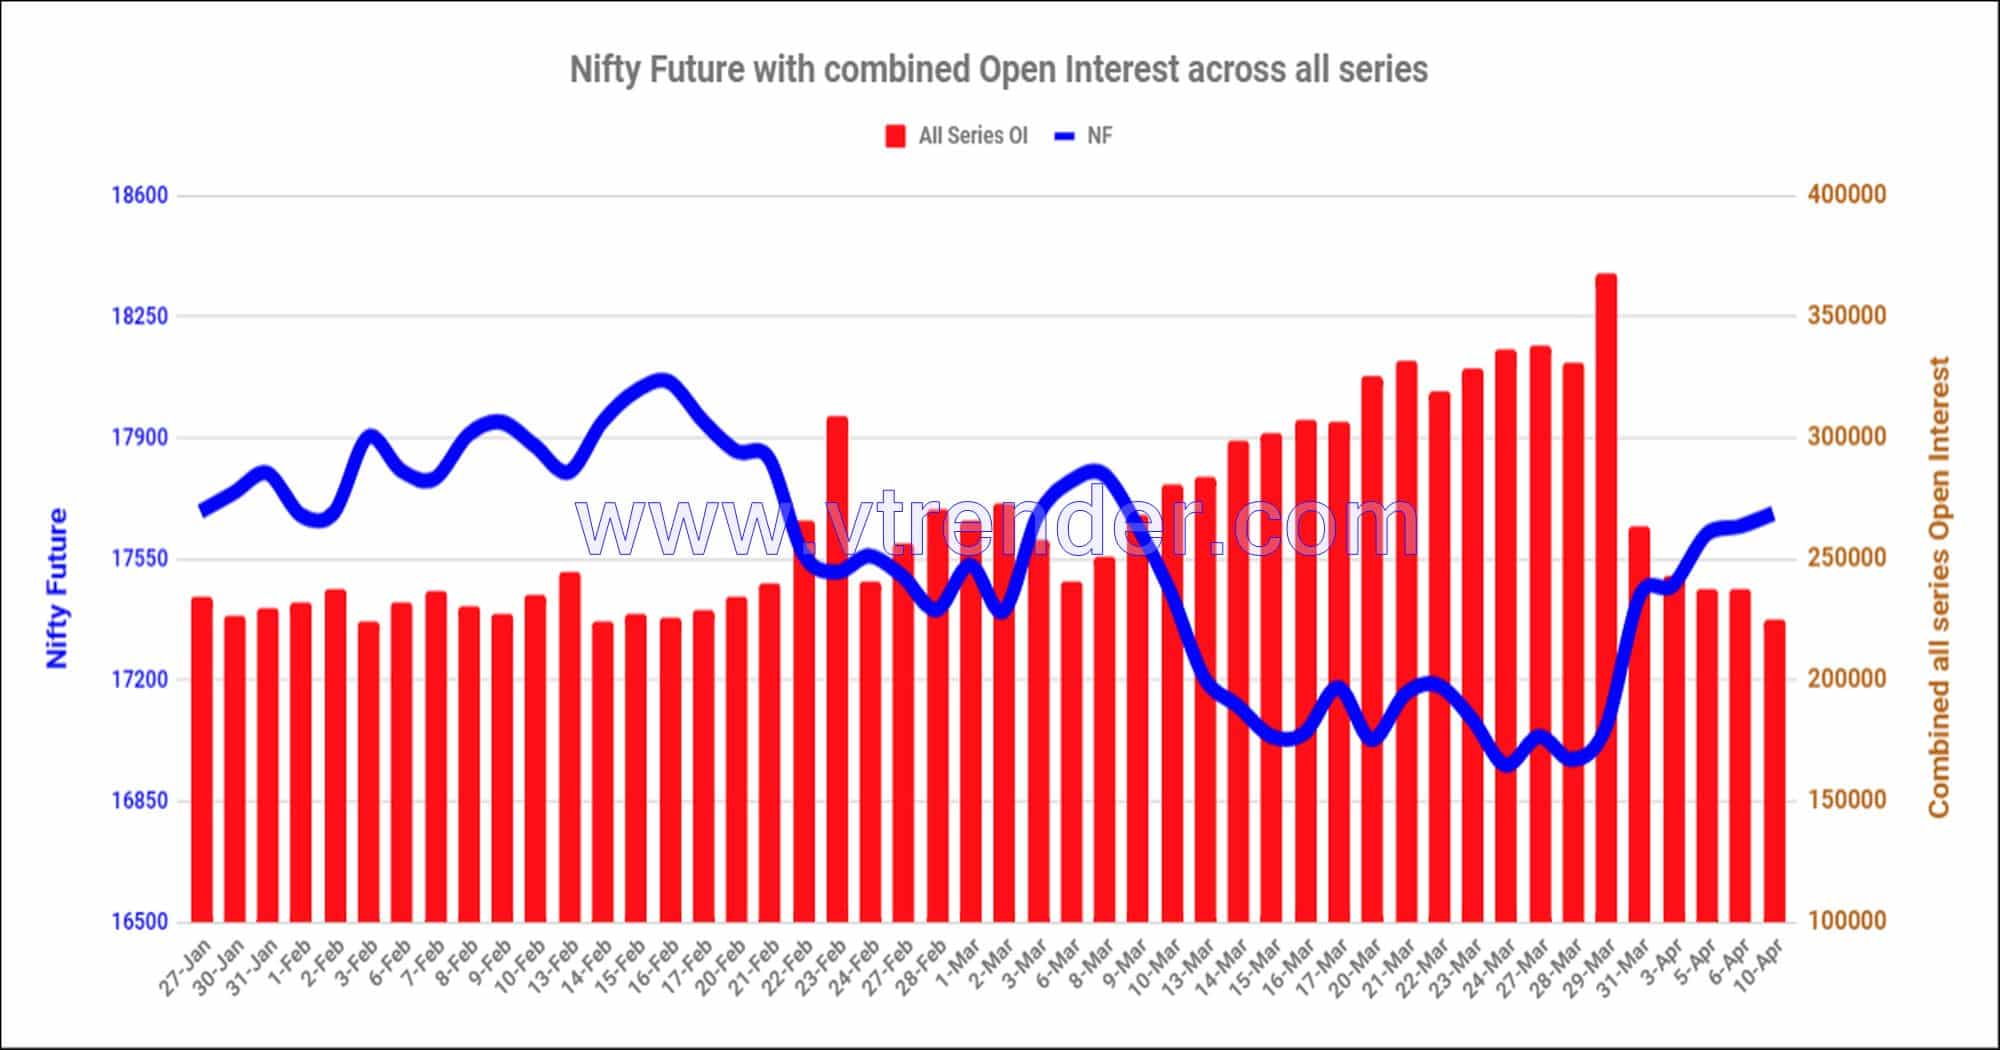 Nf10Apr Nifty And Banknifty Futures With All Series Combined Open Interest – 10Th Apr 2023 Banknifty, Nifty, Open Interest